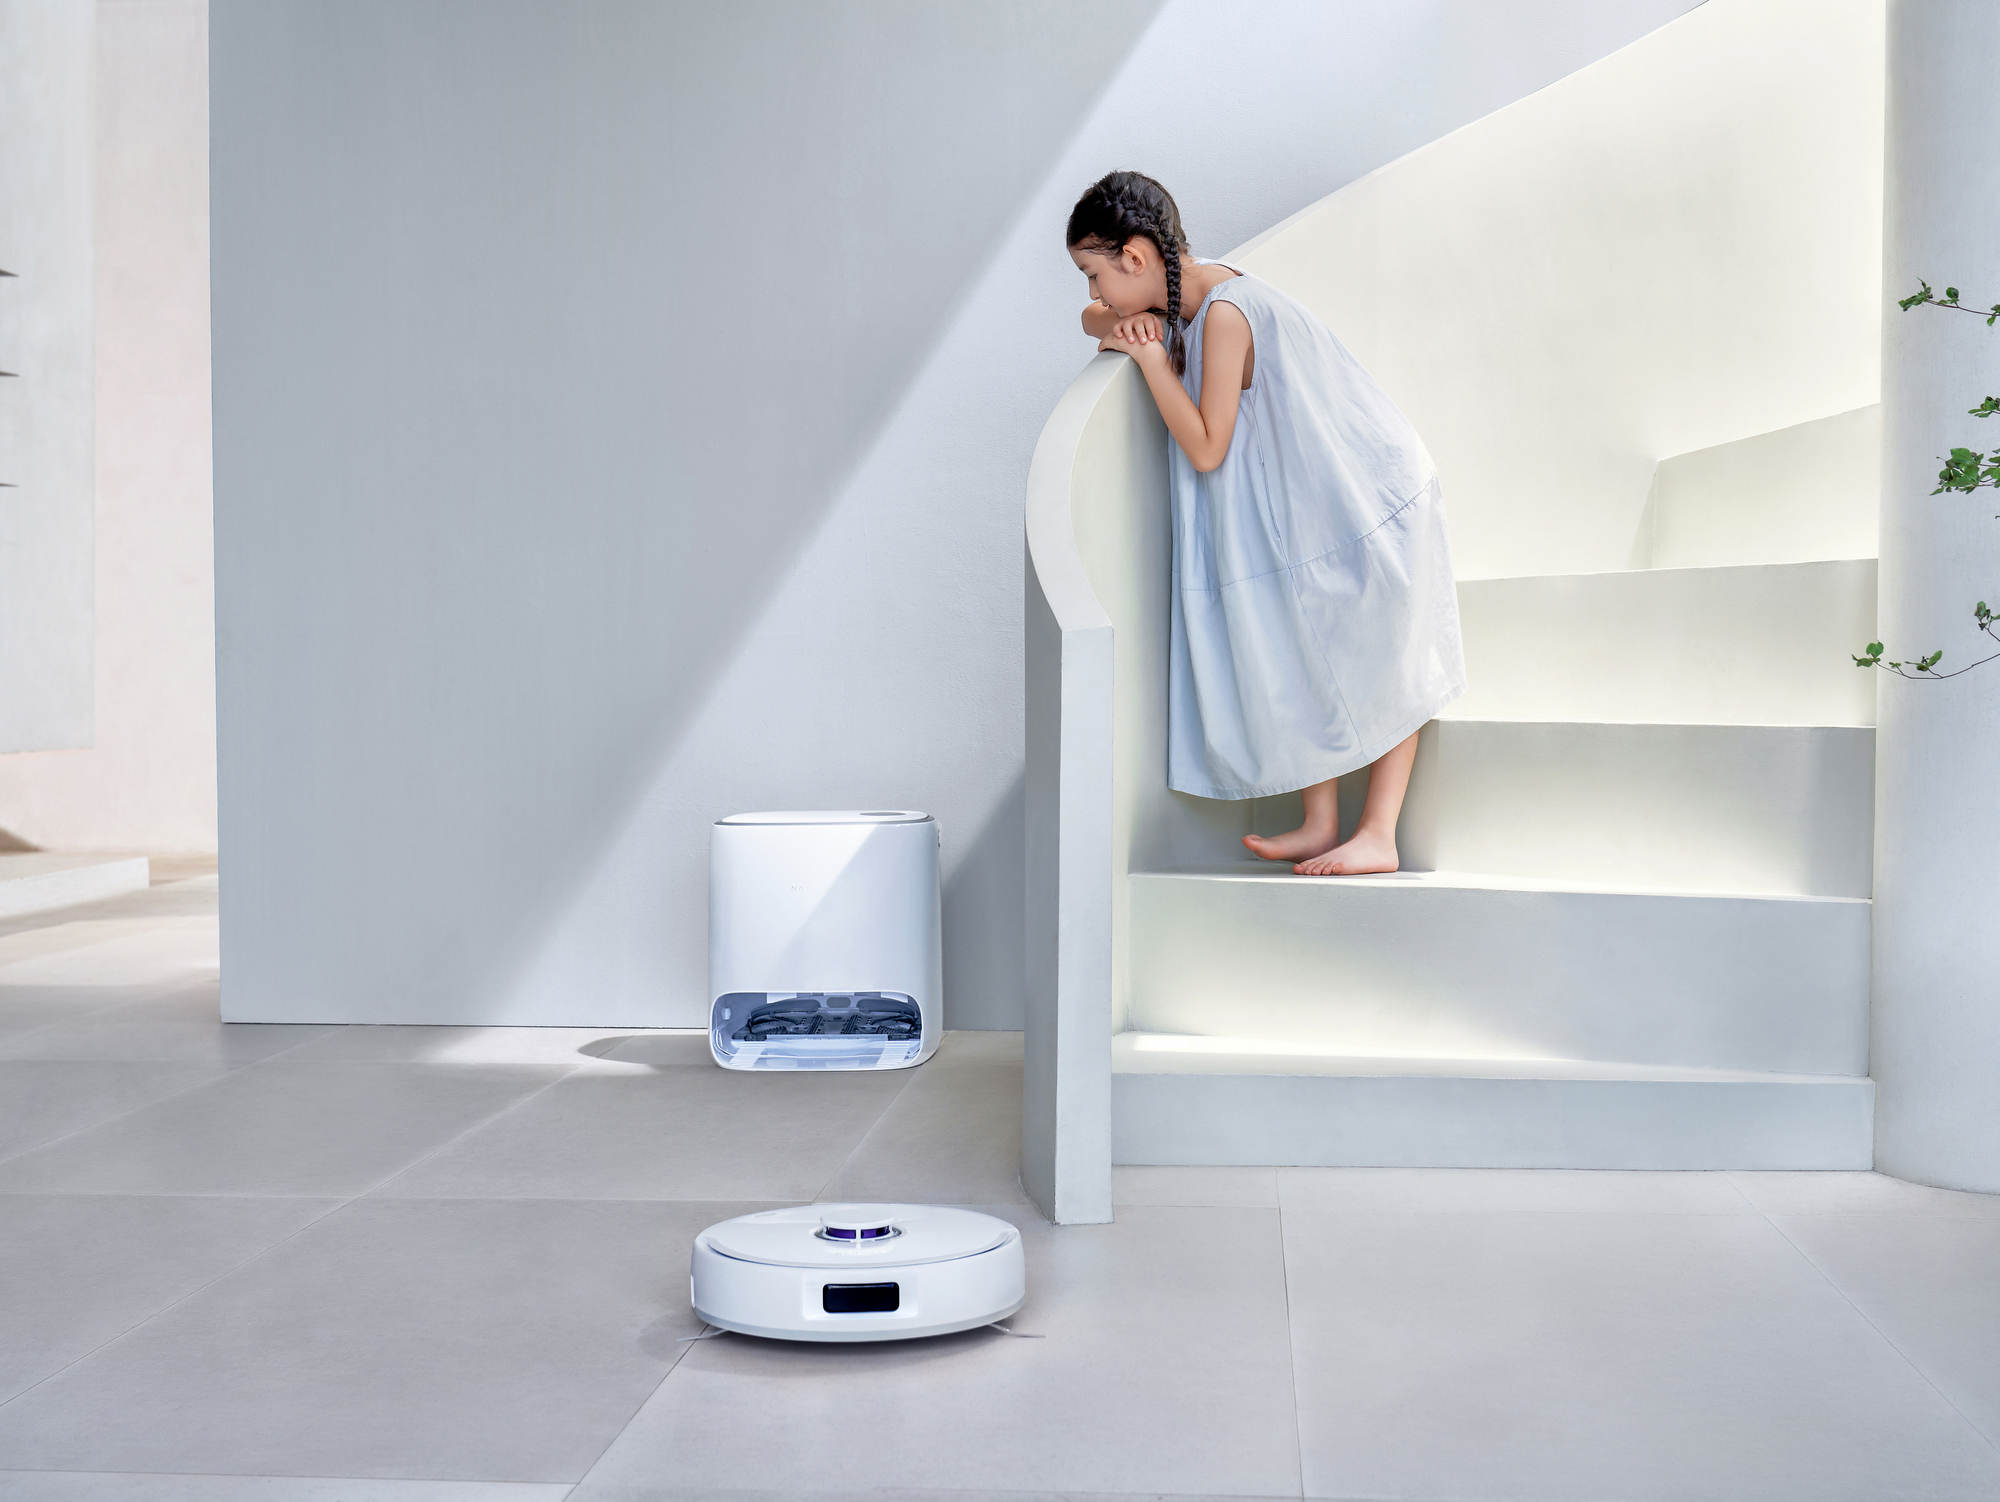 Narwal Freo X Ultra, Freo X Plus, and S10 Pro Wet Dry Vacuum: 3 New Ways to Clean That Will Make Your Life Easier